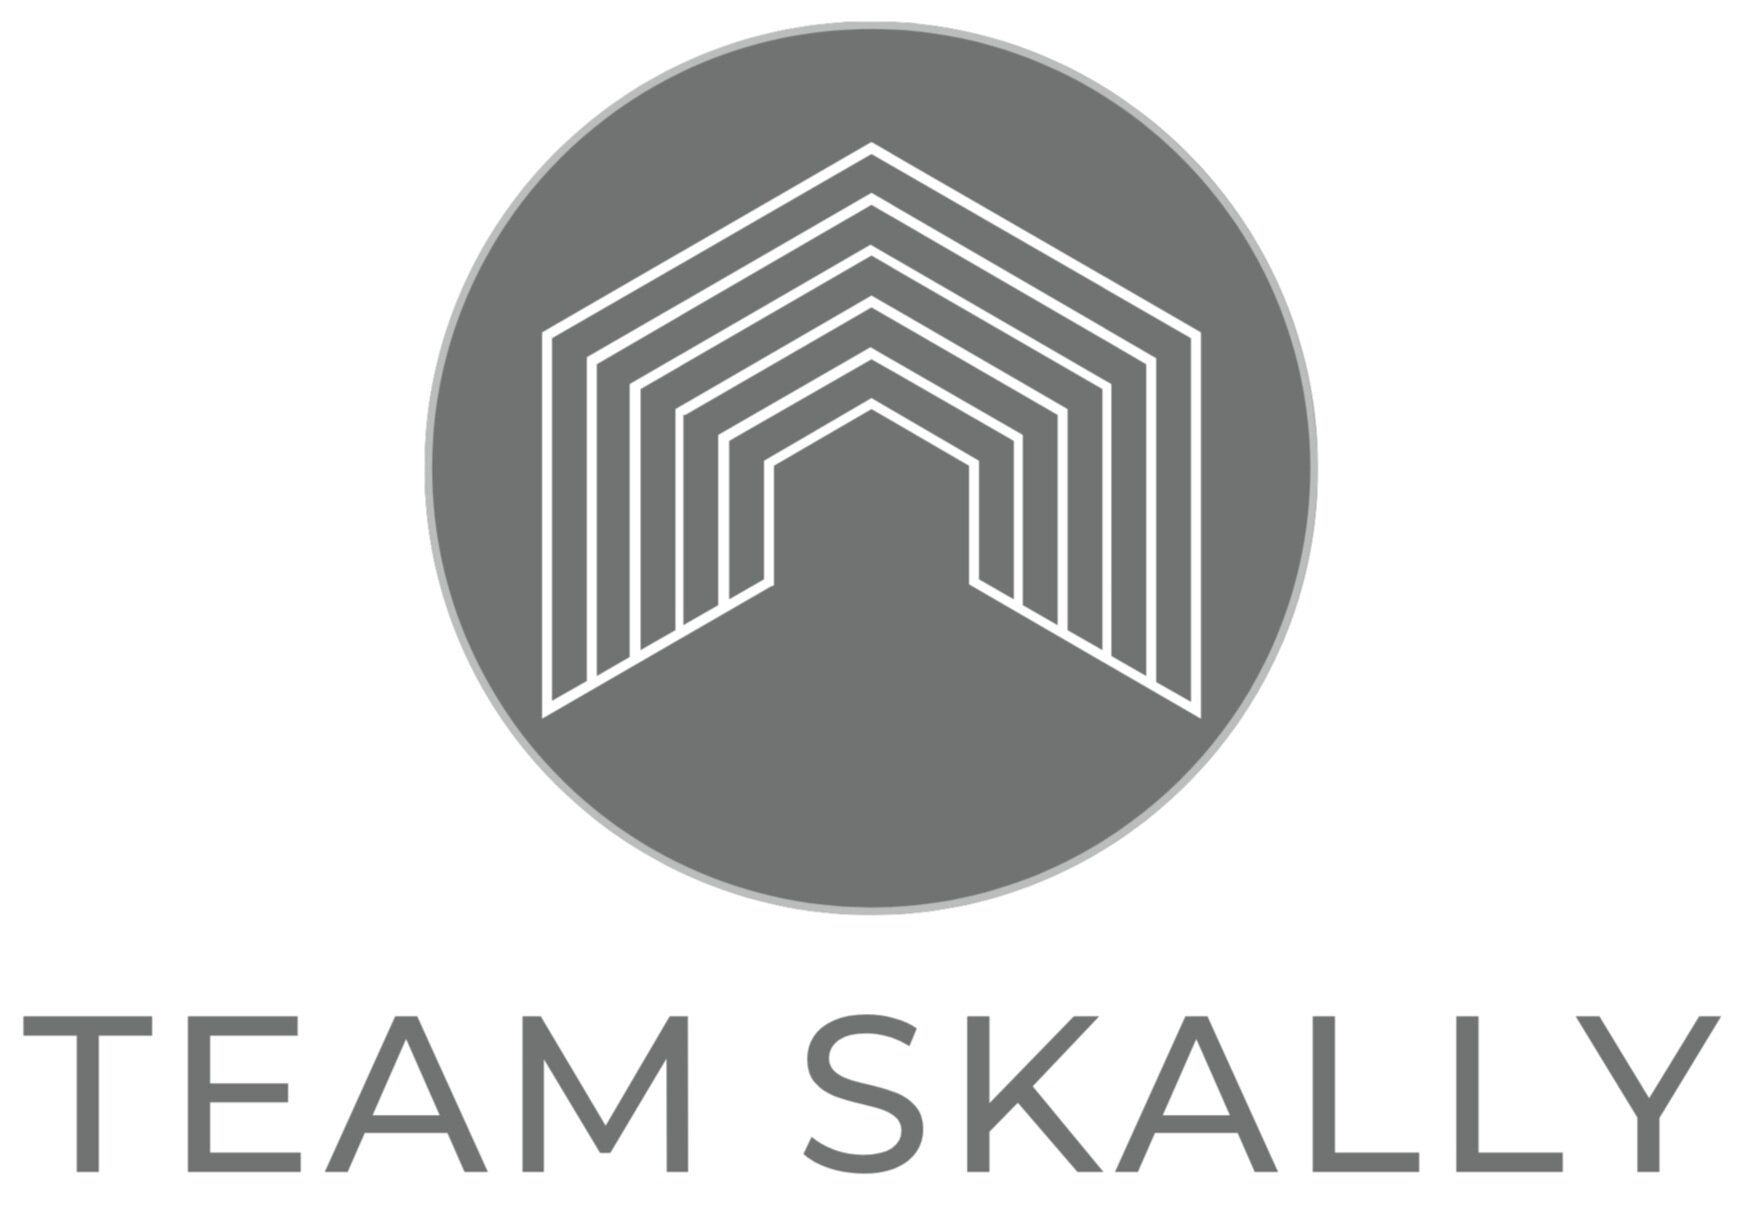 TEAM SKALLY | Top Seattle Area Real Estate Agents